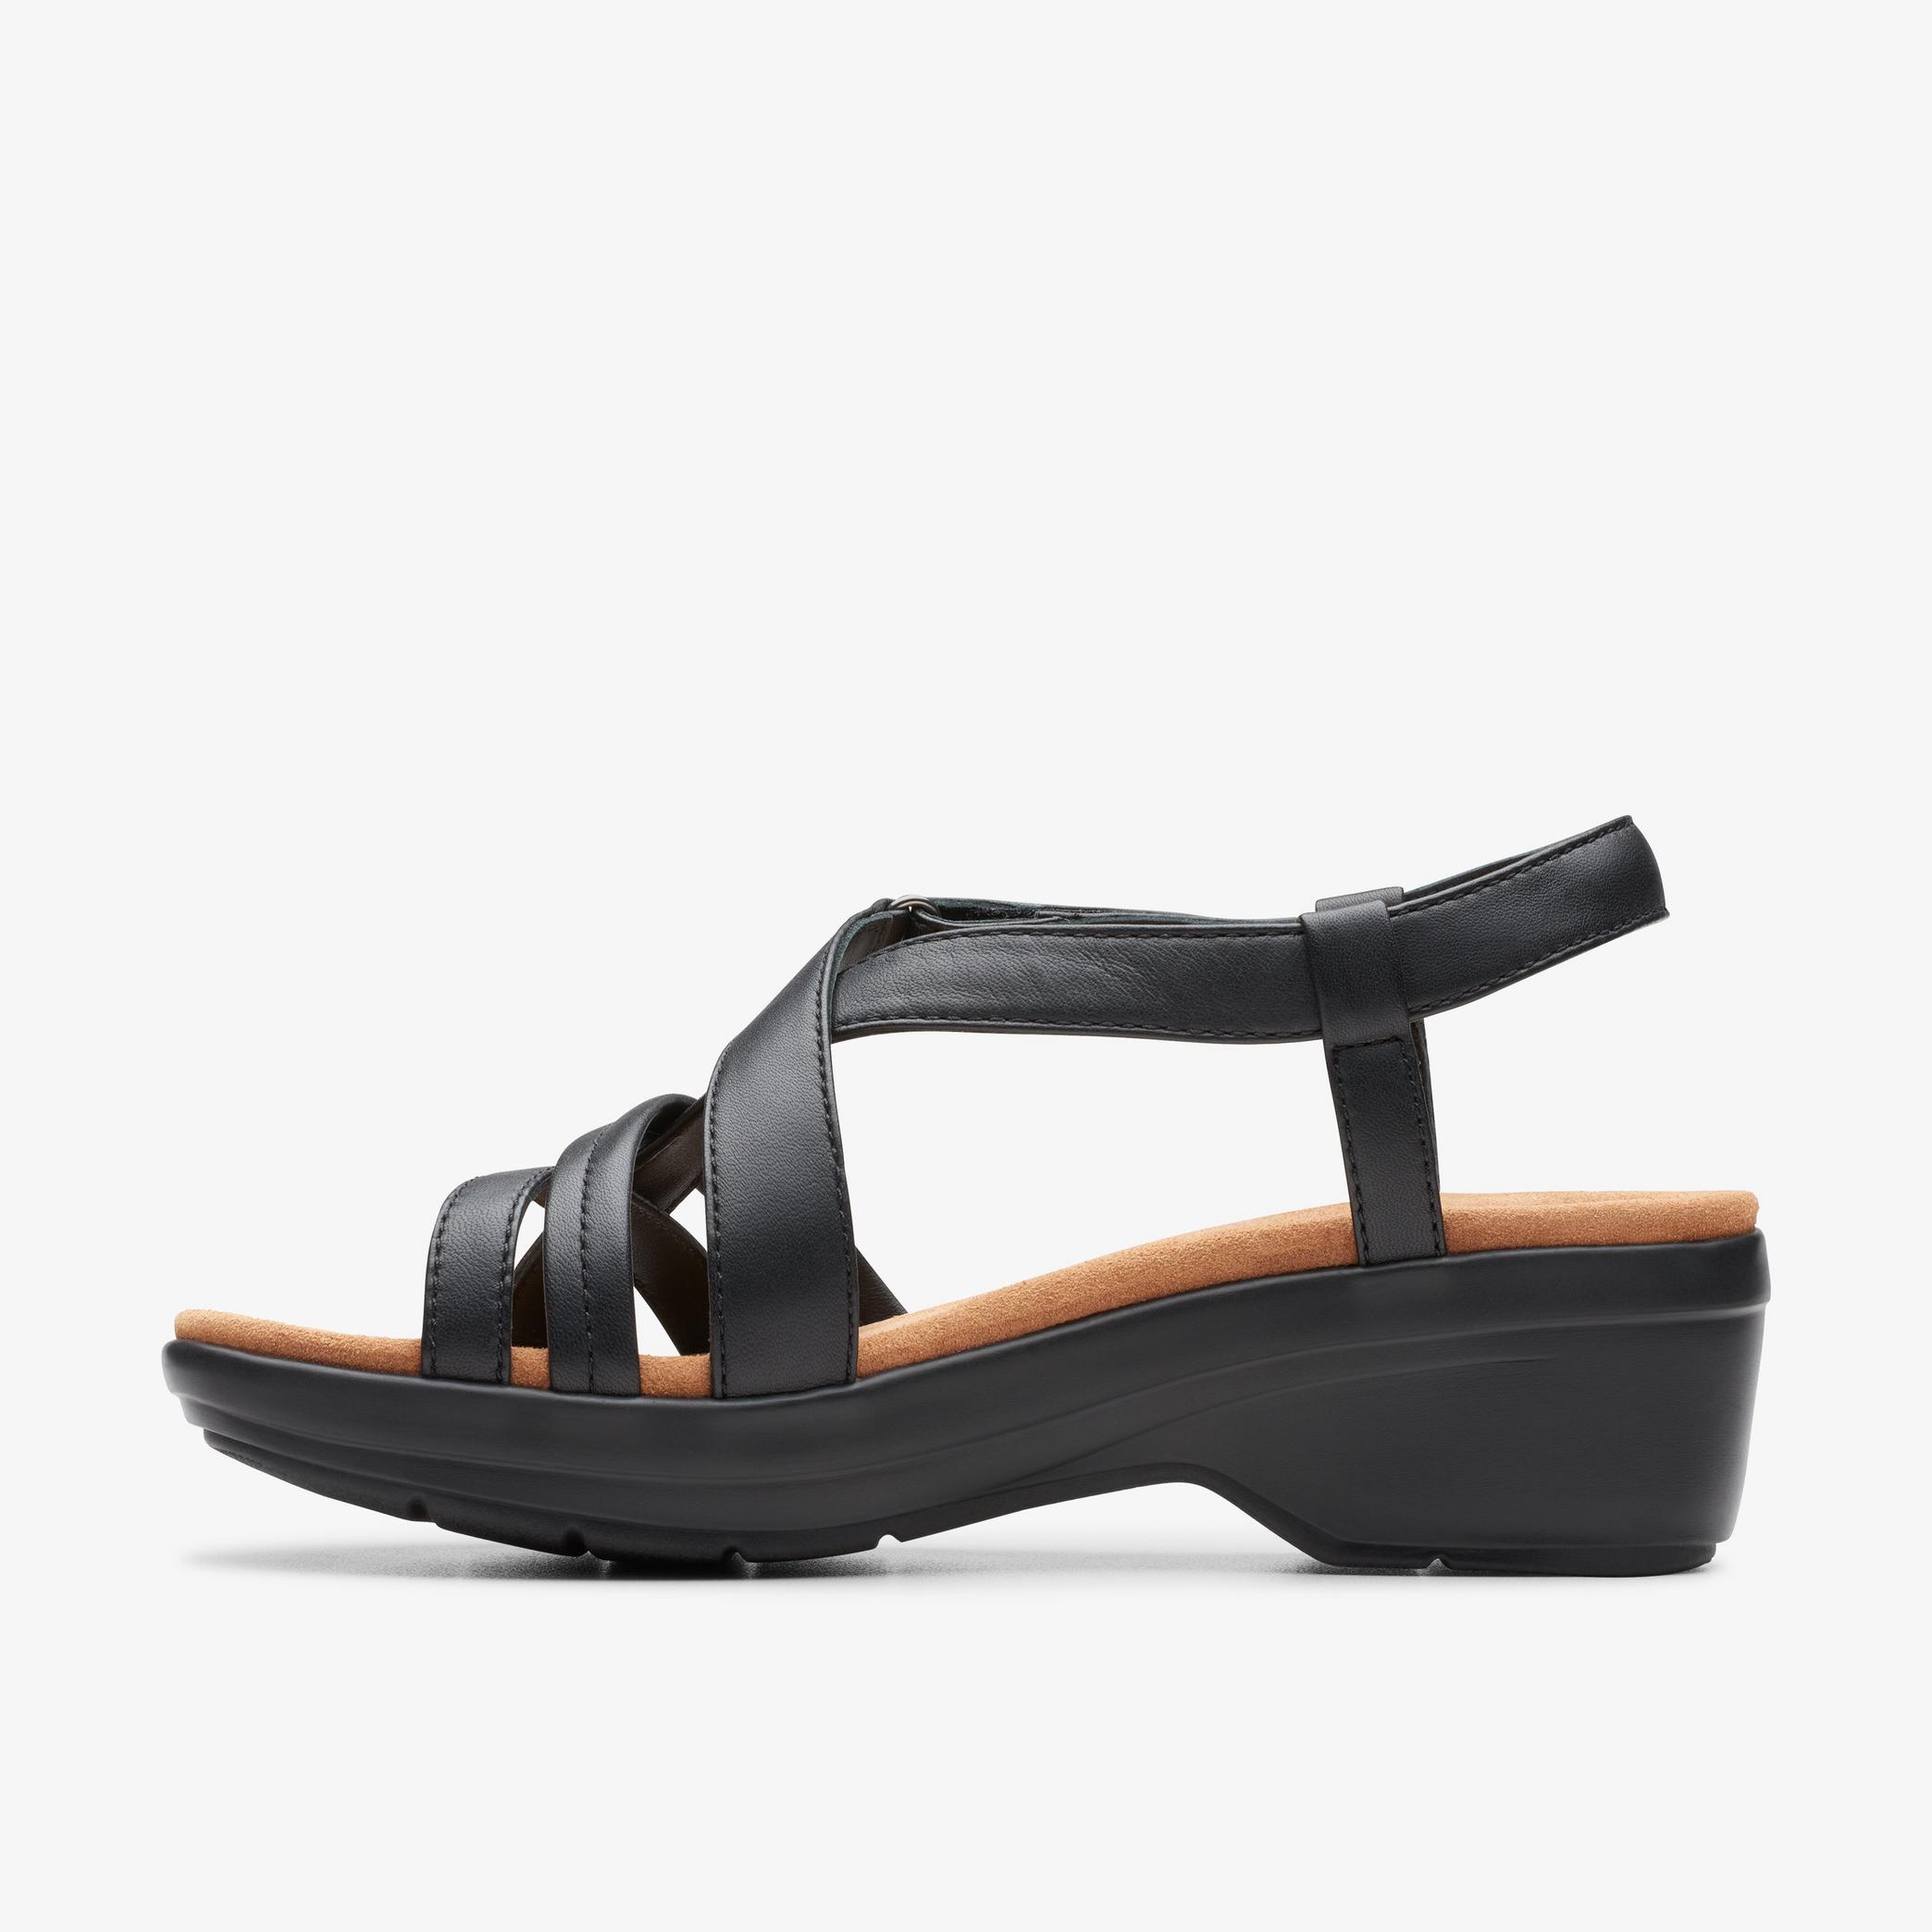 Tuleah May Black Leather Heeled Sandals, view 2 of 6